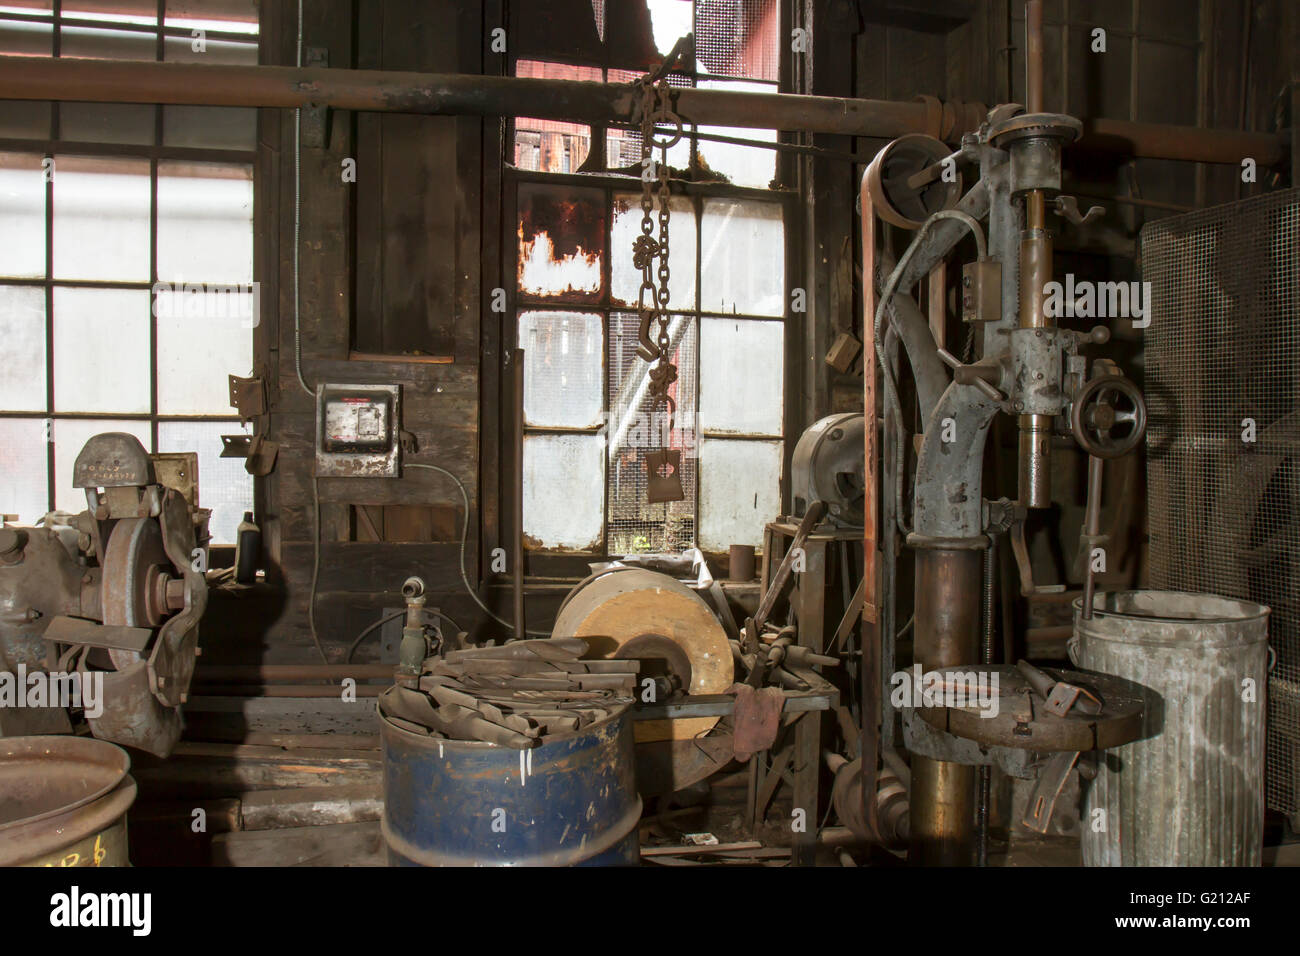 Rusing tools and equipmemt in vintage machinery shed. Stock Photo